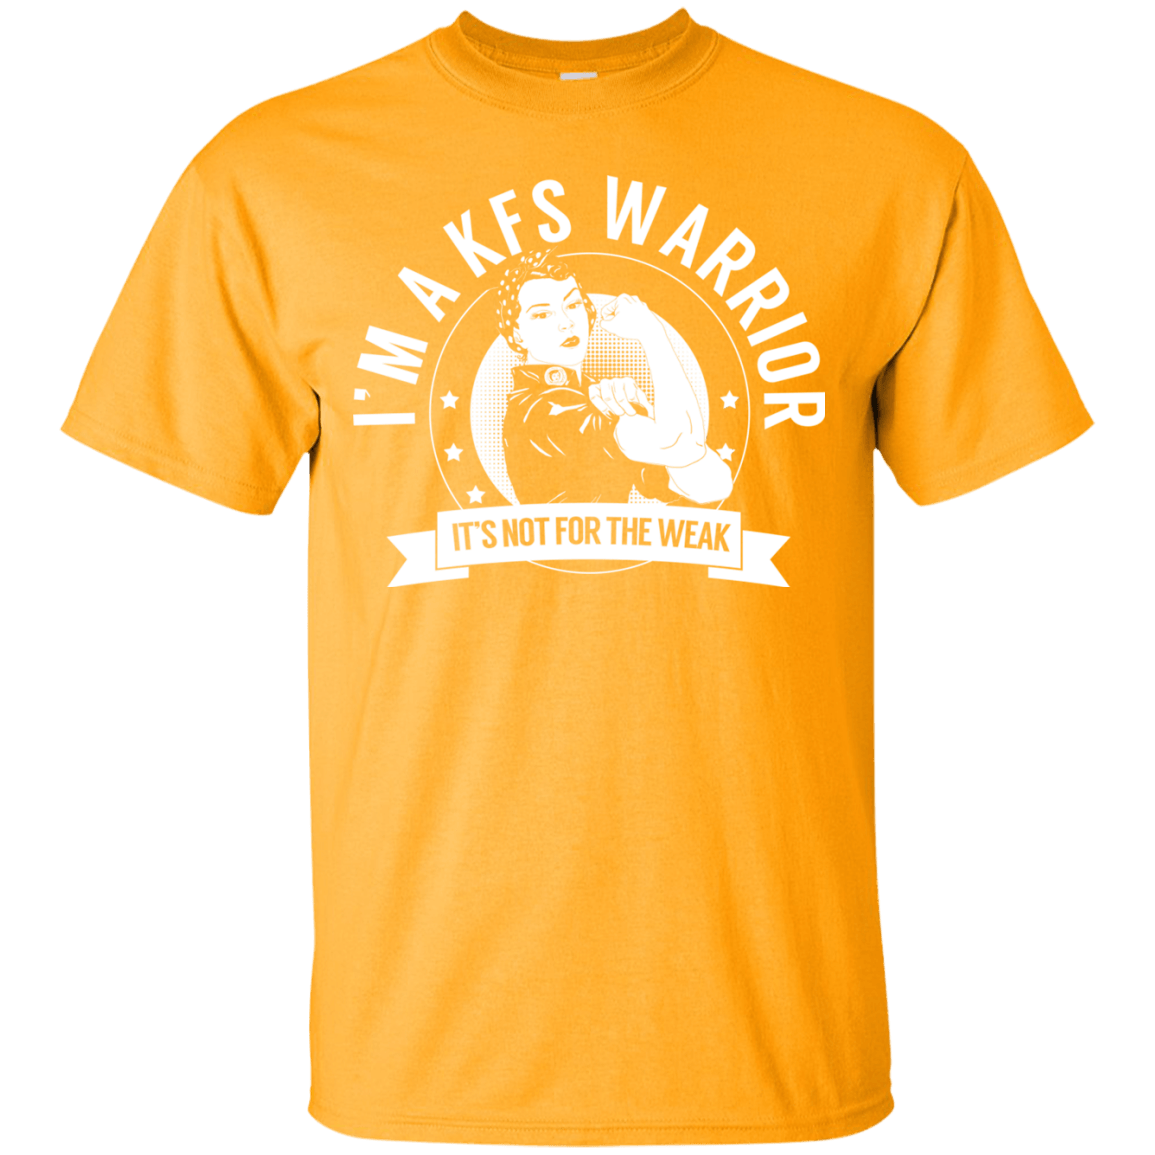 Klippel-Feil Syndrome - KFS Warrior Not For The Weak Cotton T-Shirt - The Unchargeables